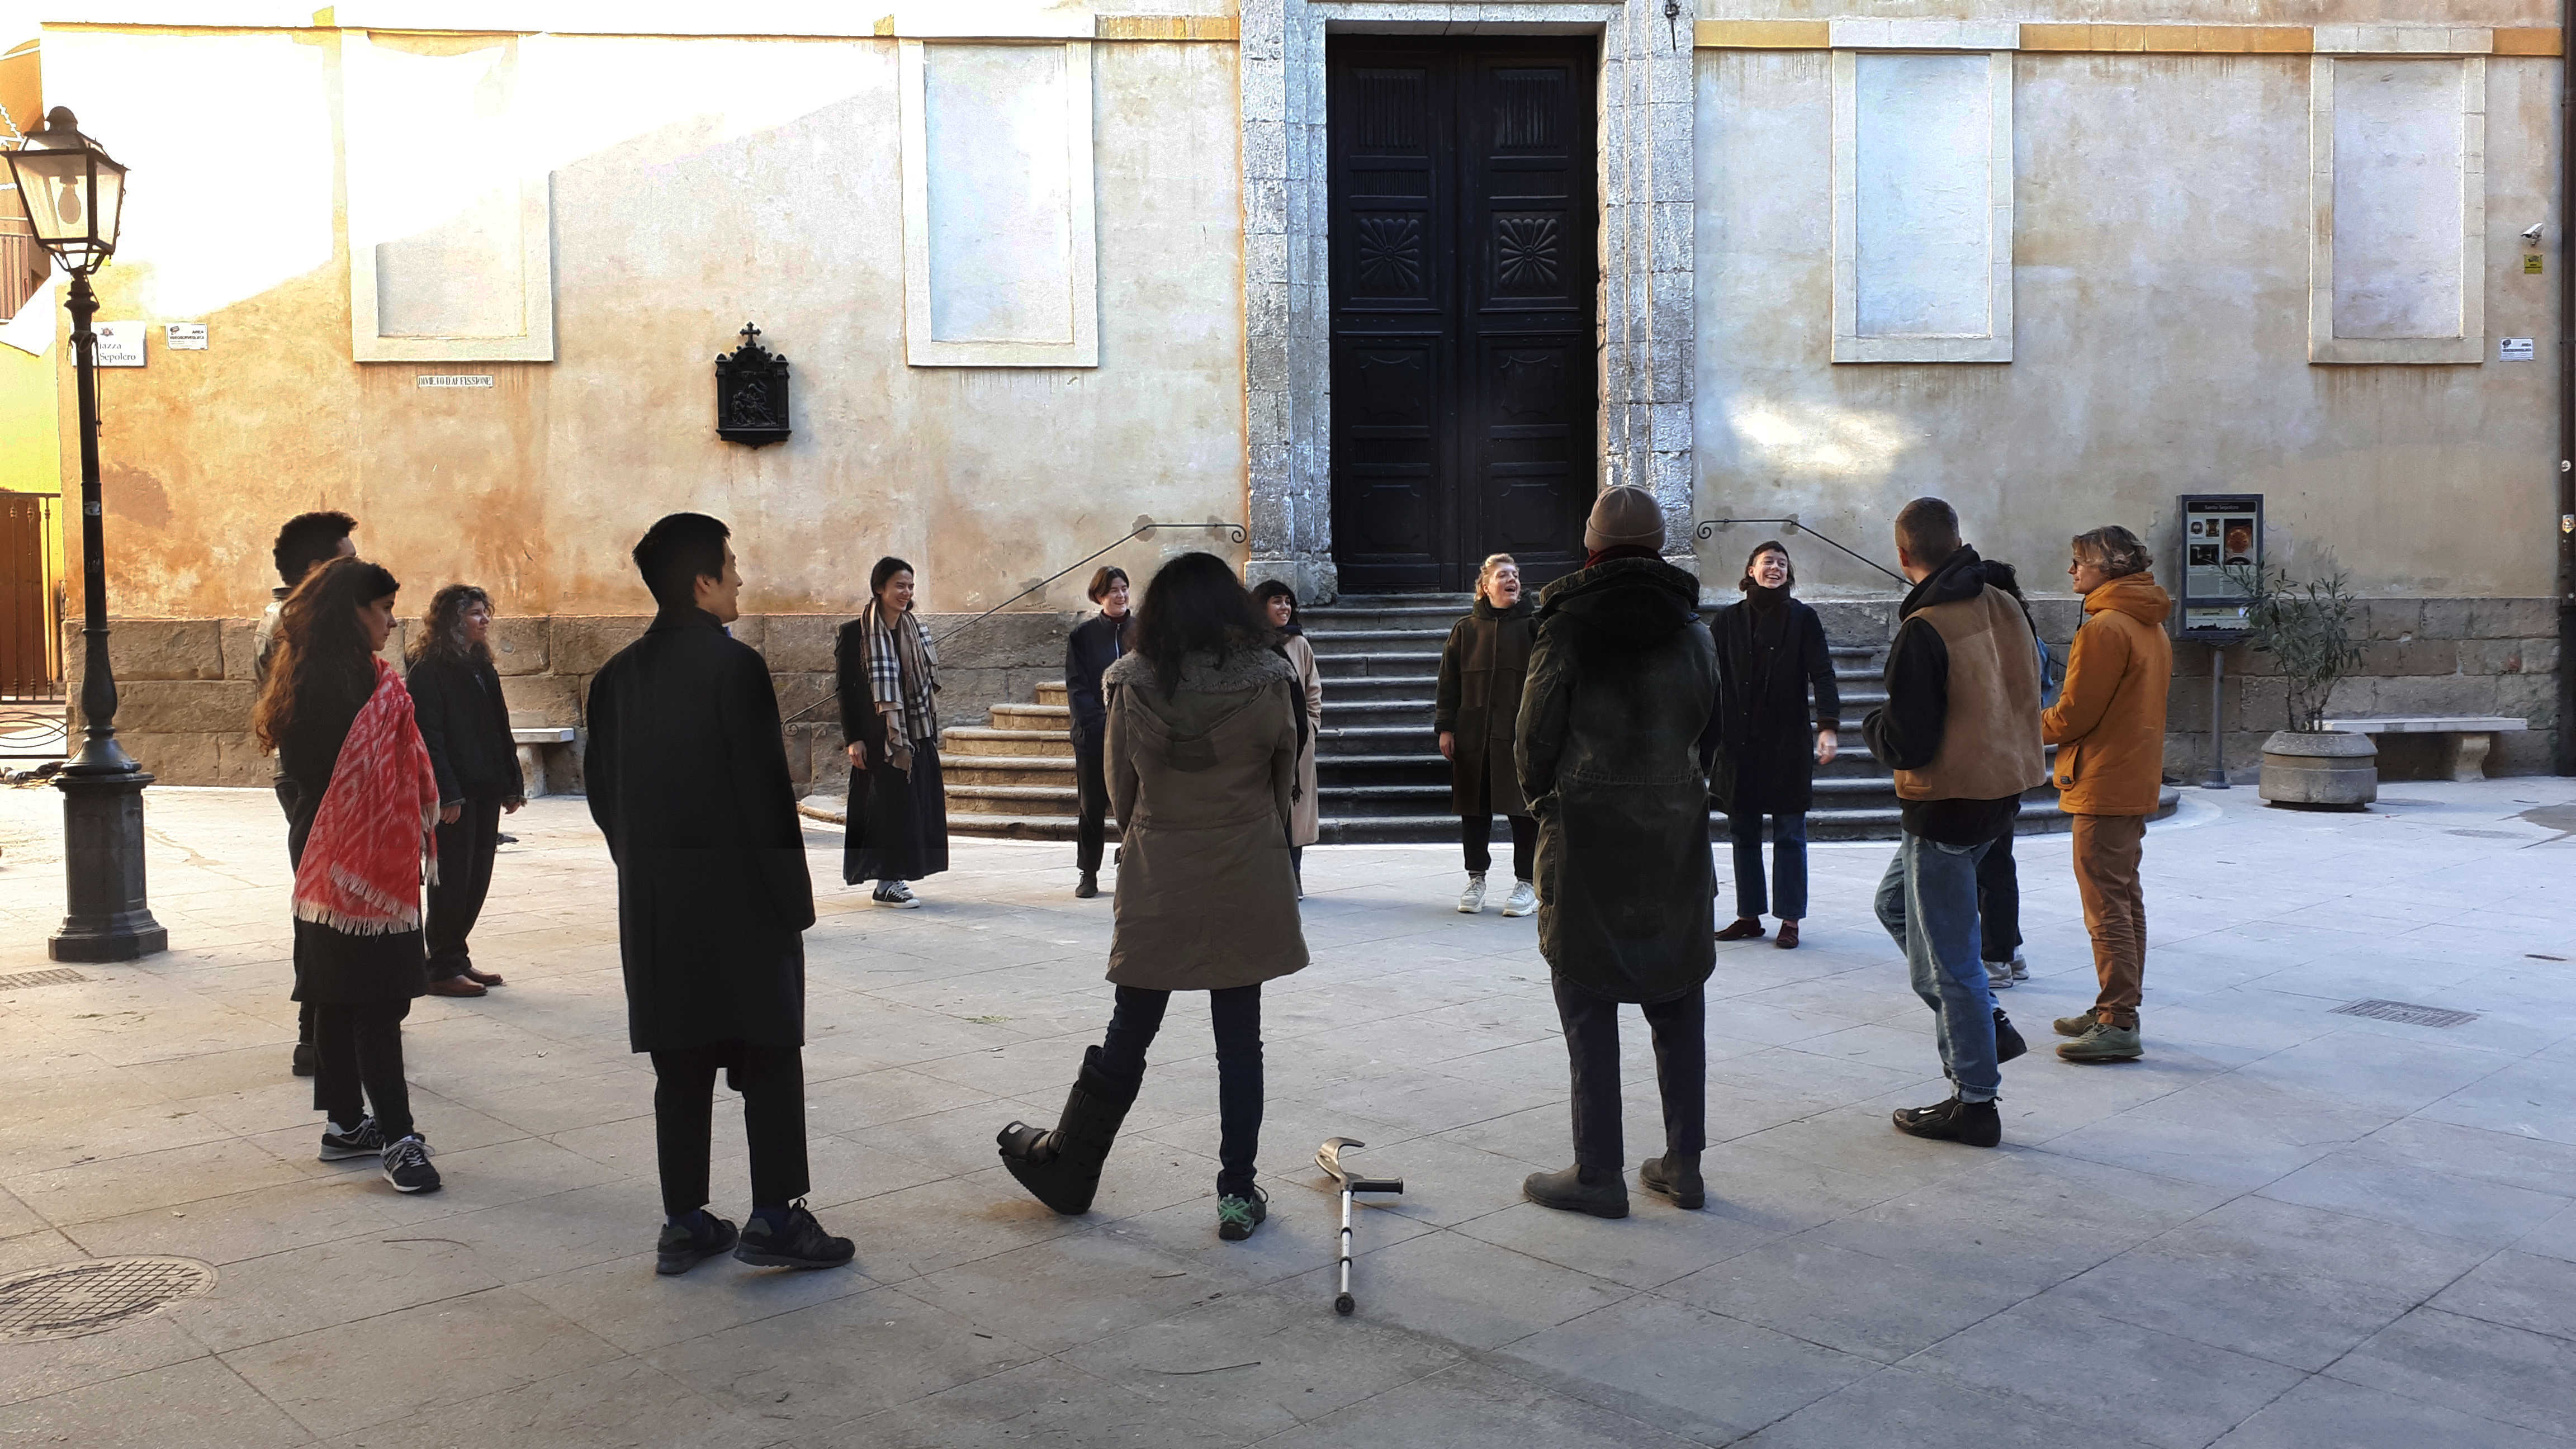 Justice Economy Factory Workshop group performing collective body exercises in public space, Cagliari January 2019. Photo credits: Nikos Doulos